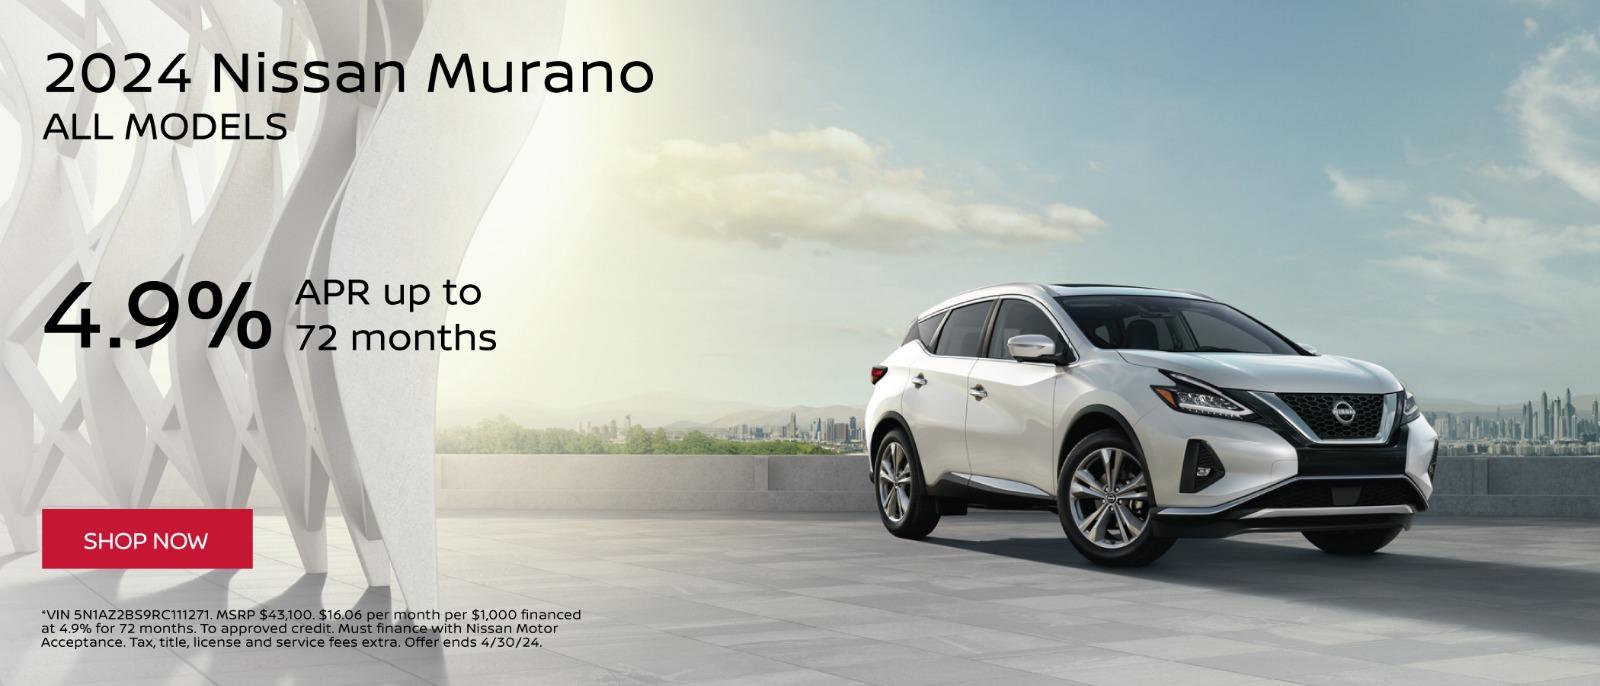 2024 Nissan Murano 4.9% APR Up to 72months